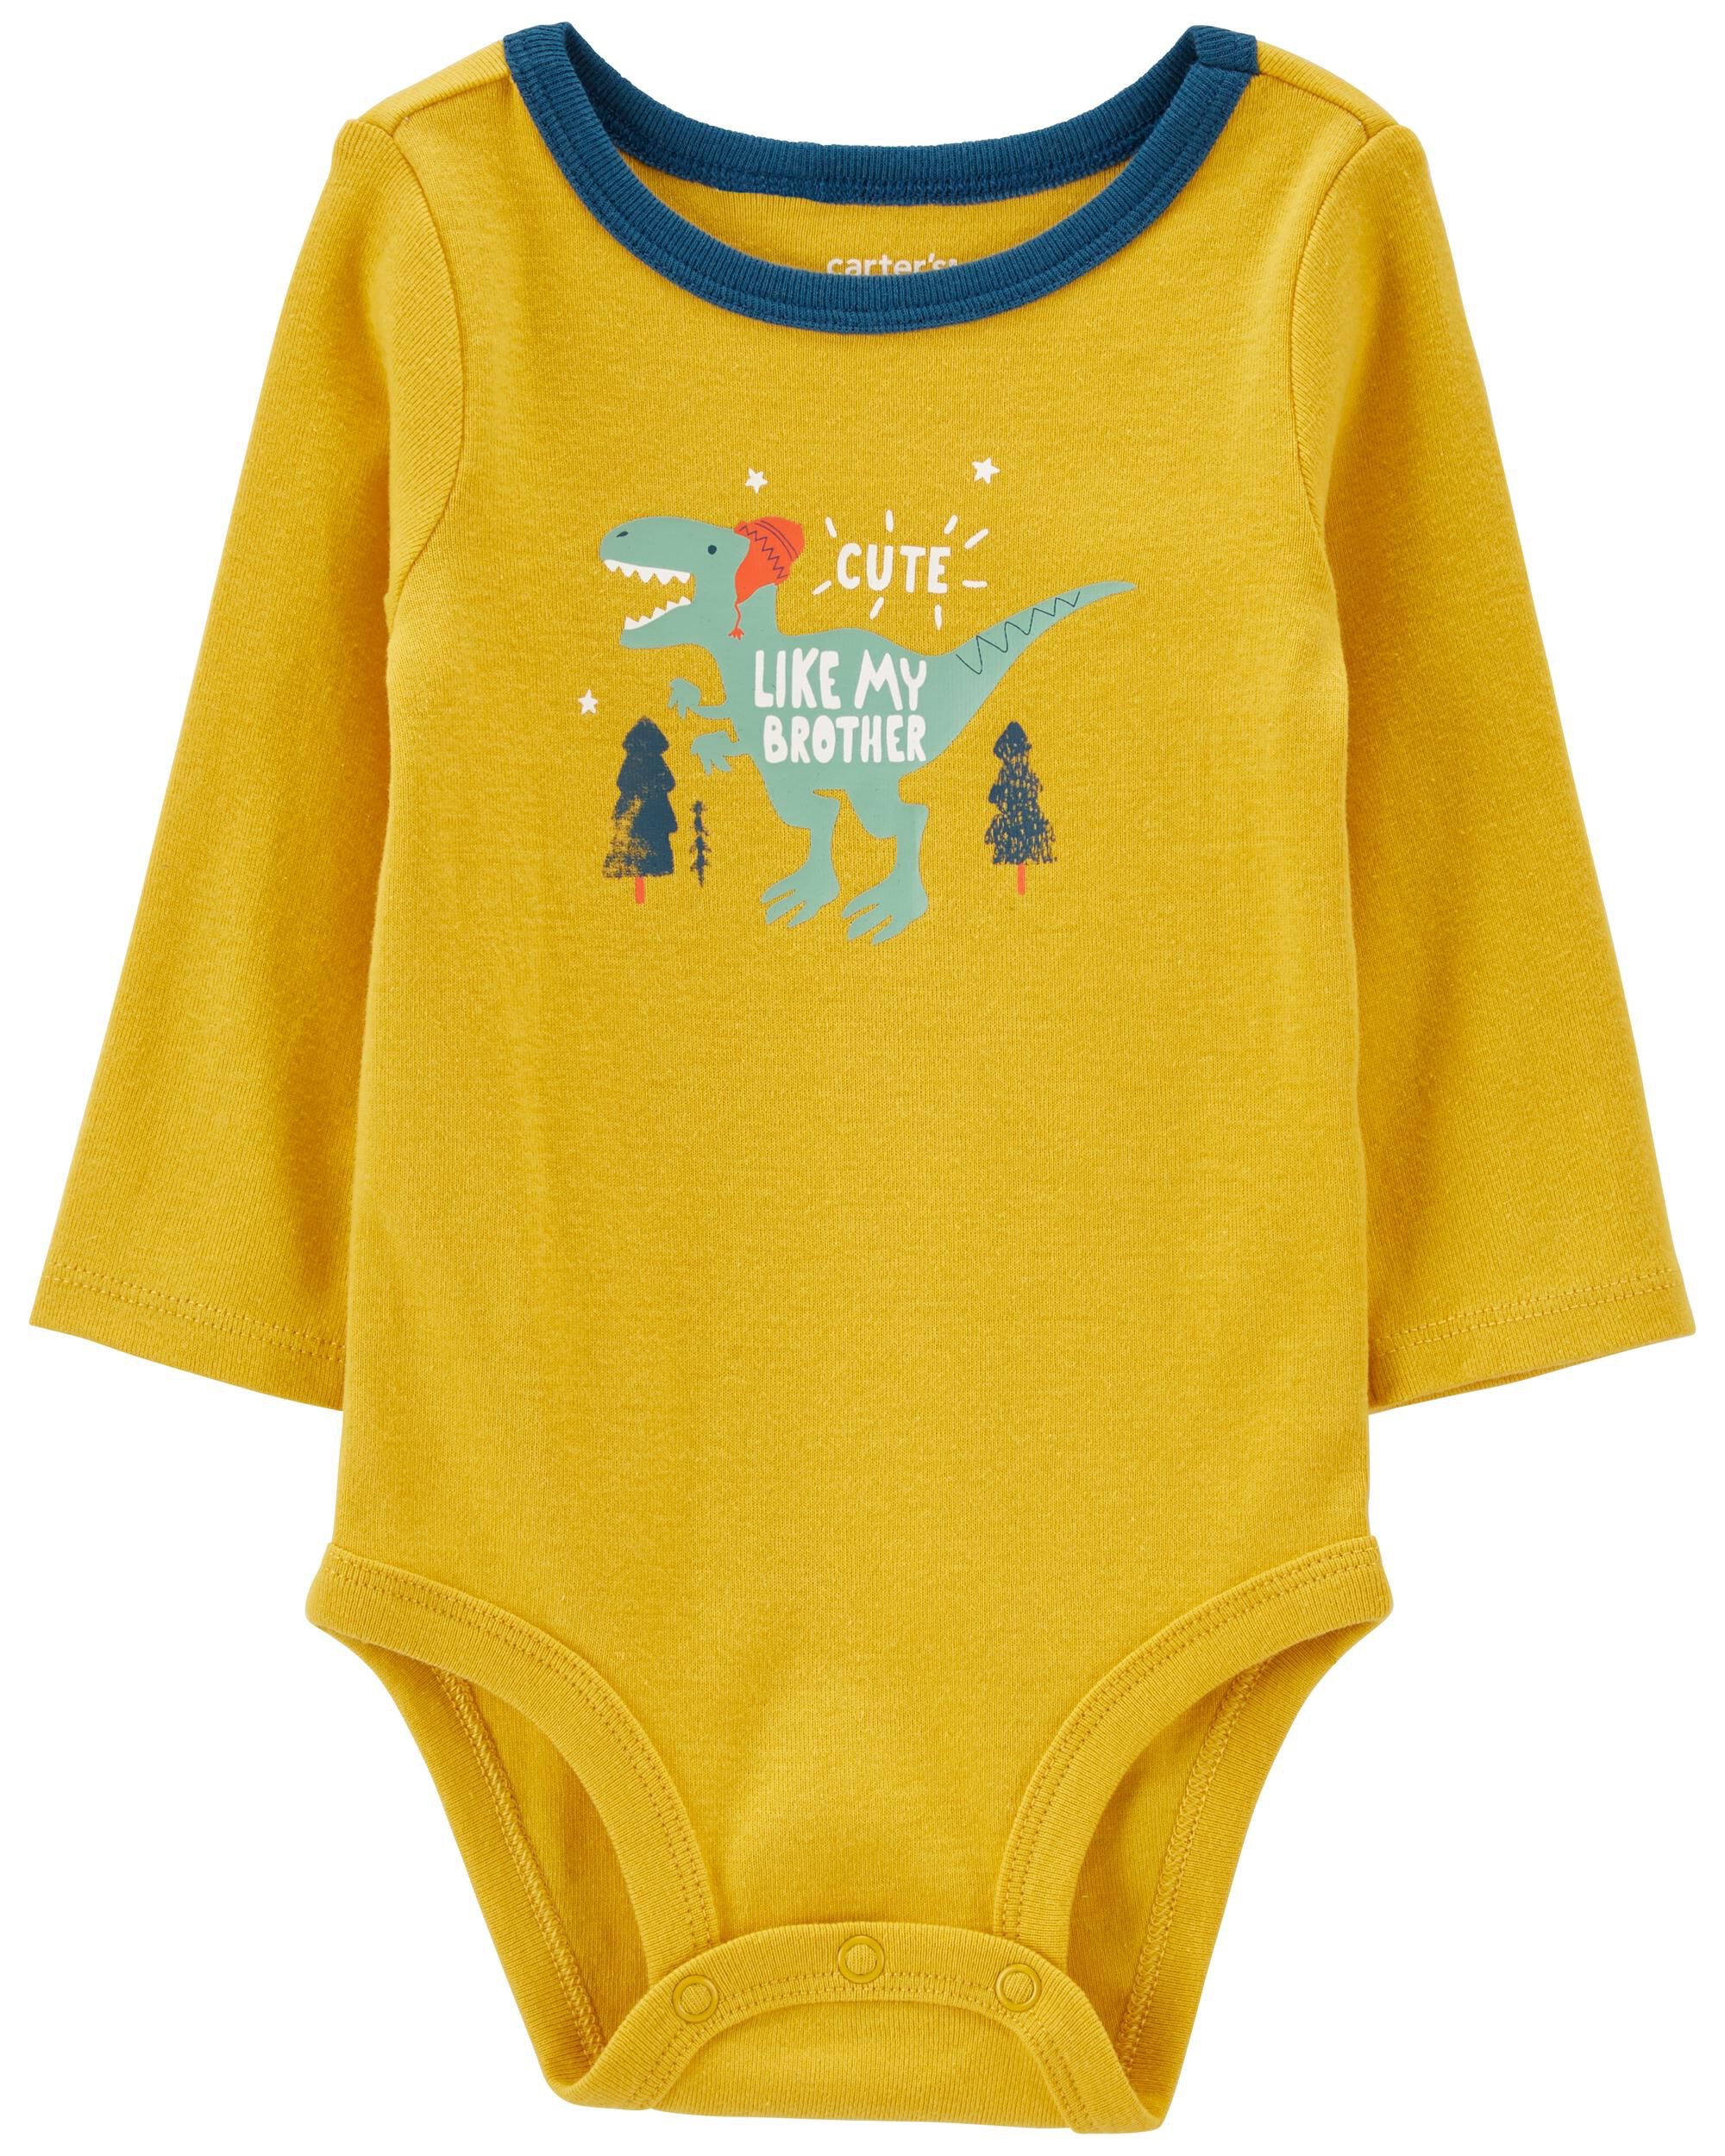 Yellow Baby Cute Like Brother Long-Sleeve Bodysuit | carters.com